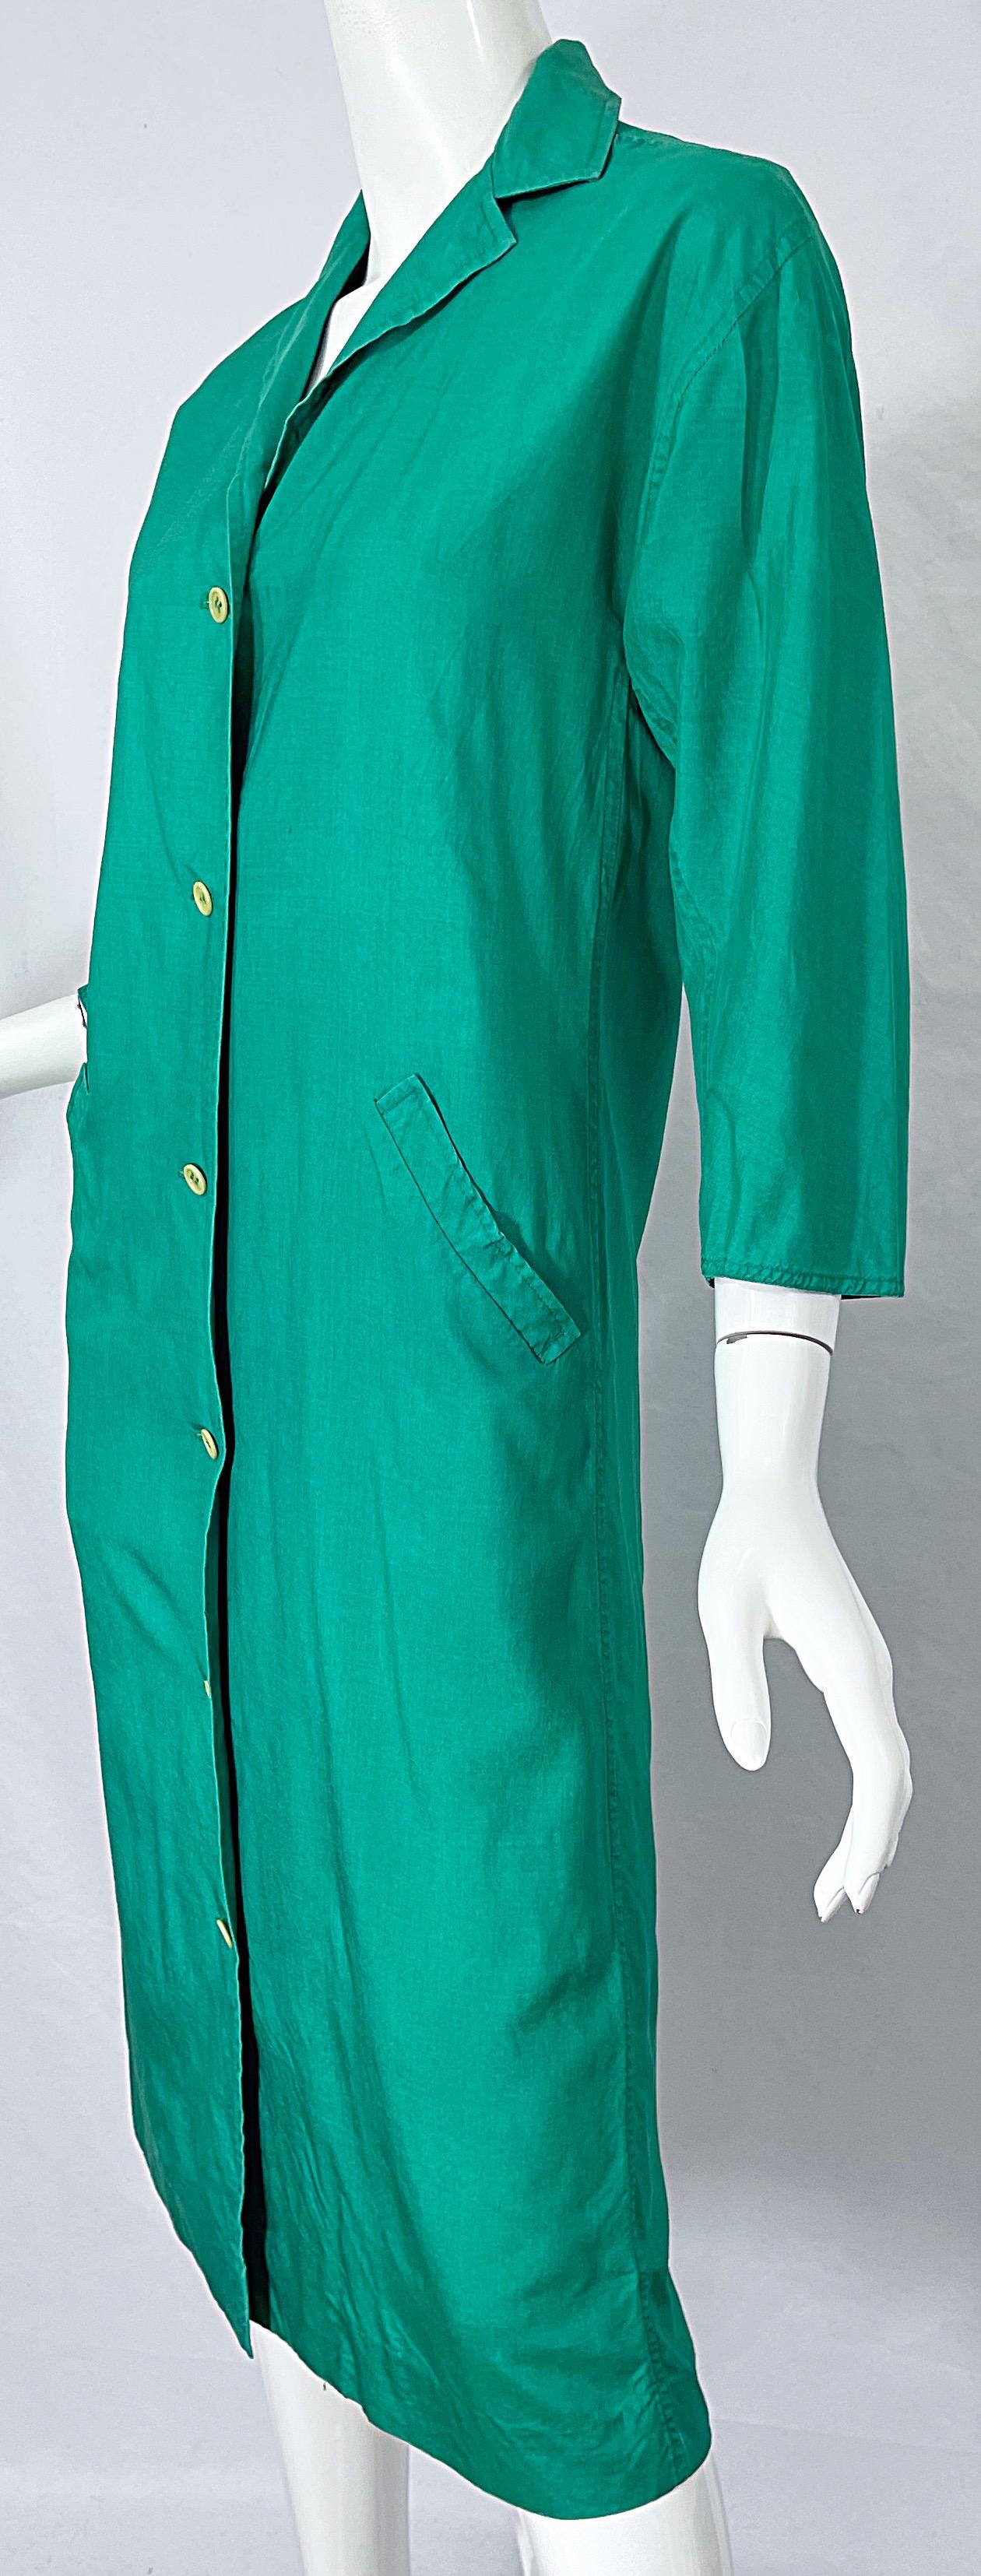 1970s Halston Kelly Green Silk 3/4 Sleeves Vintage 70s Shirt Dress w/ Pockets For Sale 3